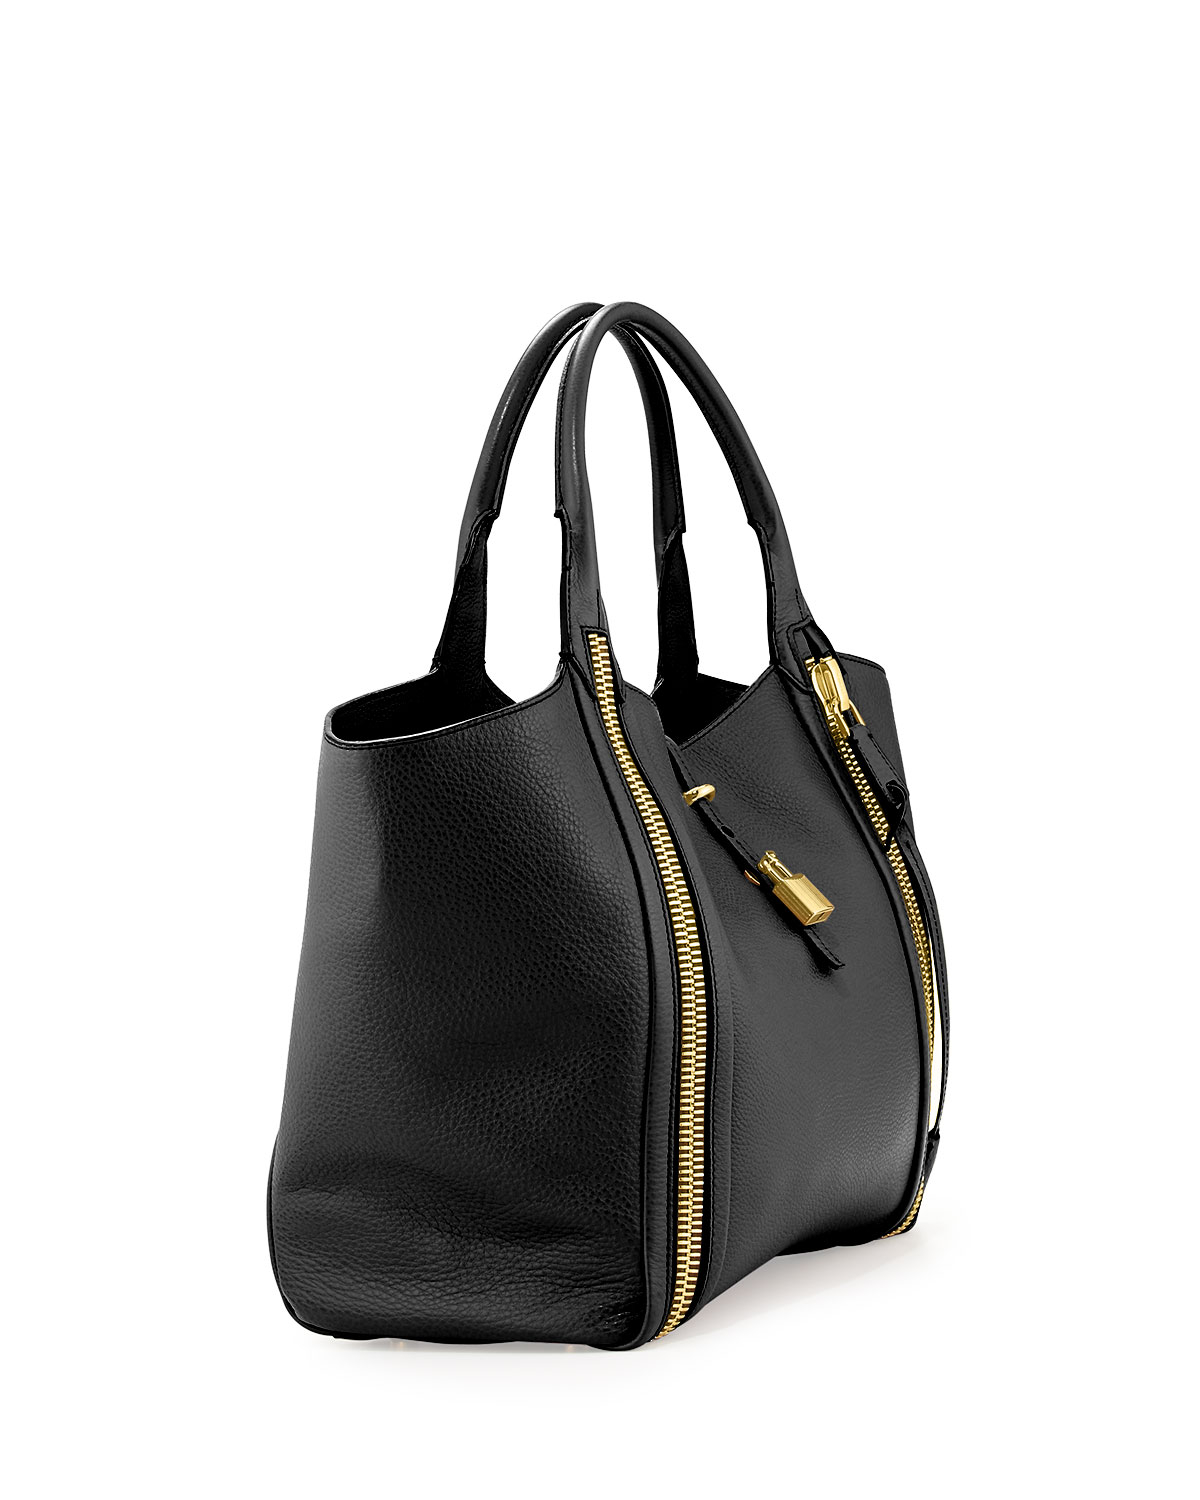 Tom Ford Amber Double-Zip Leather/Suede Tote Bag in Black - Lyst